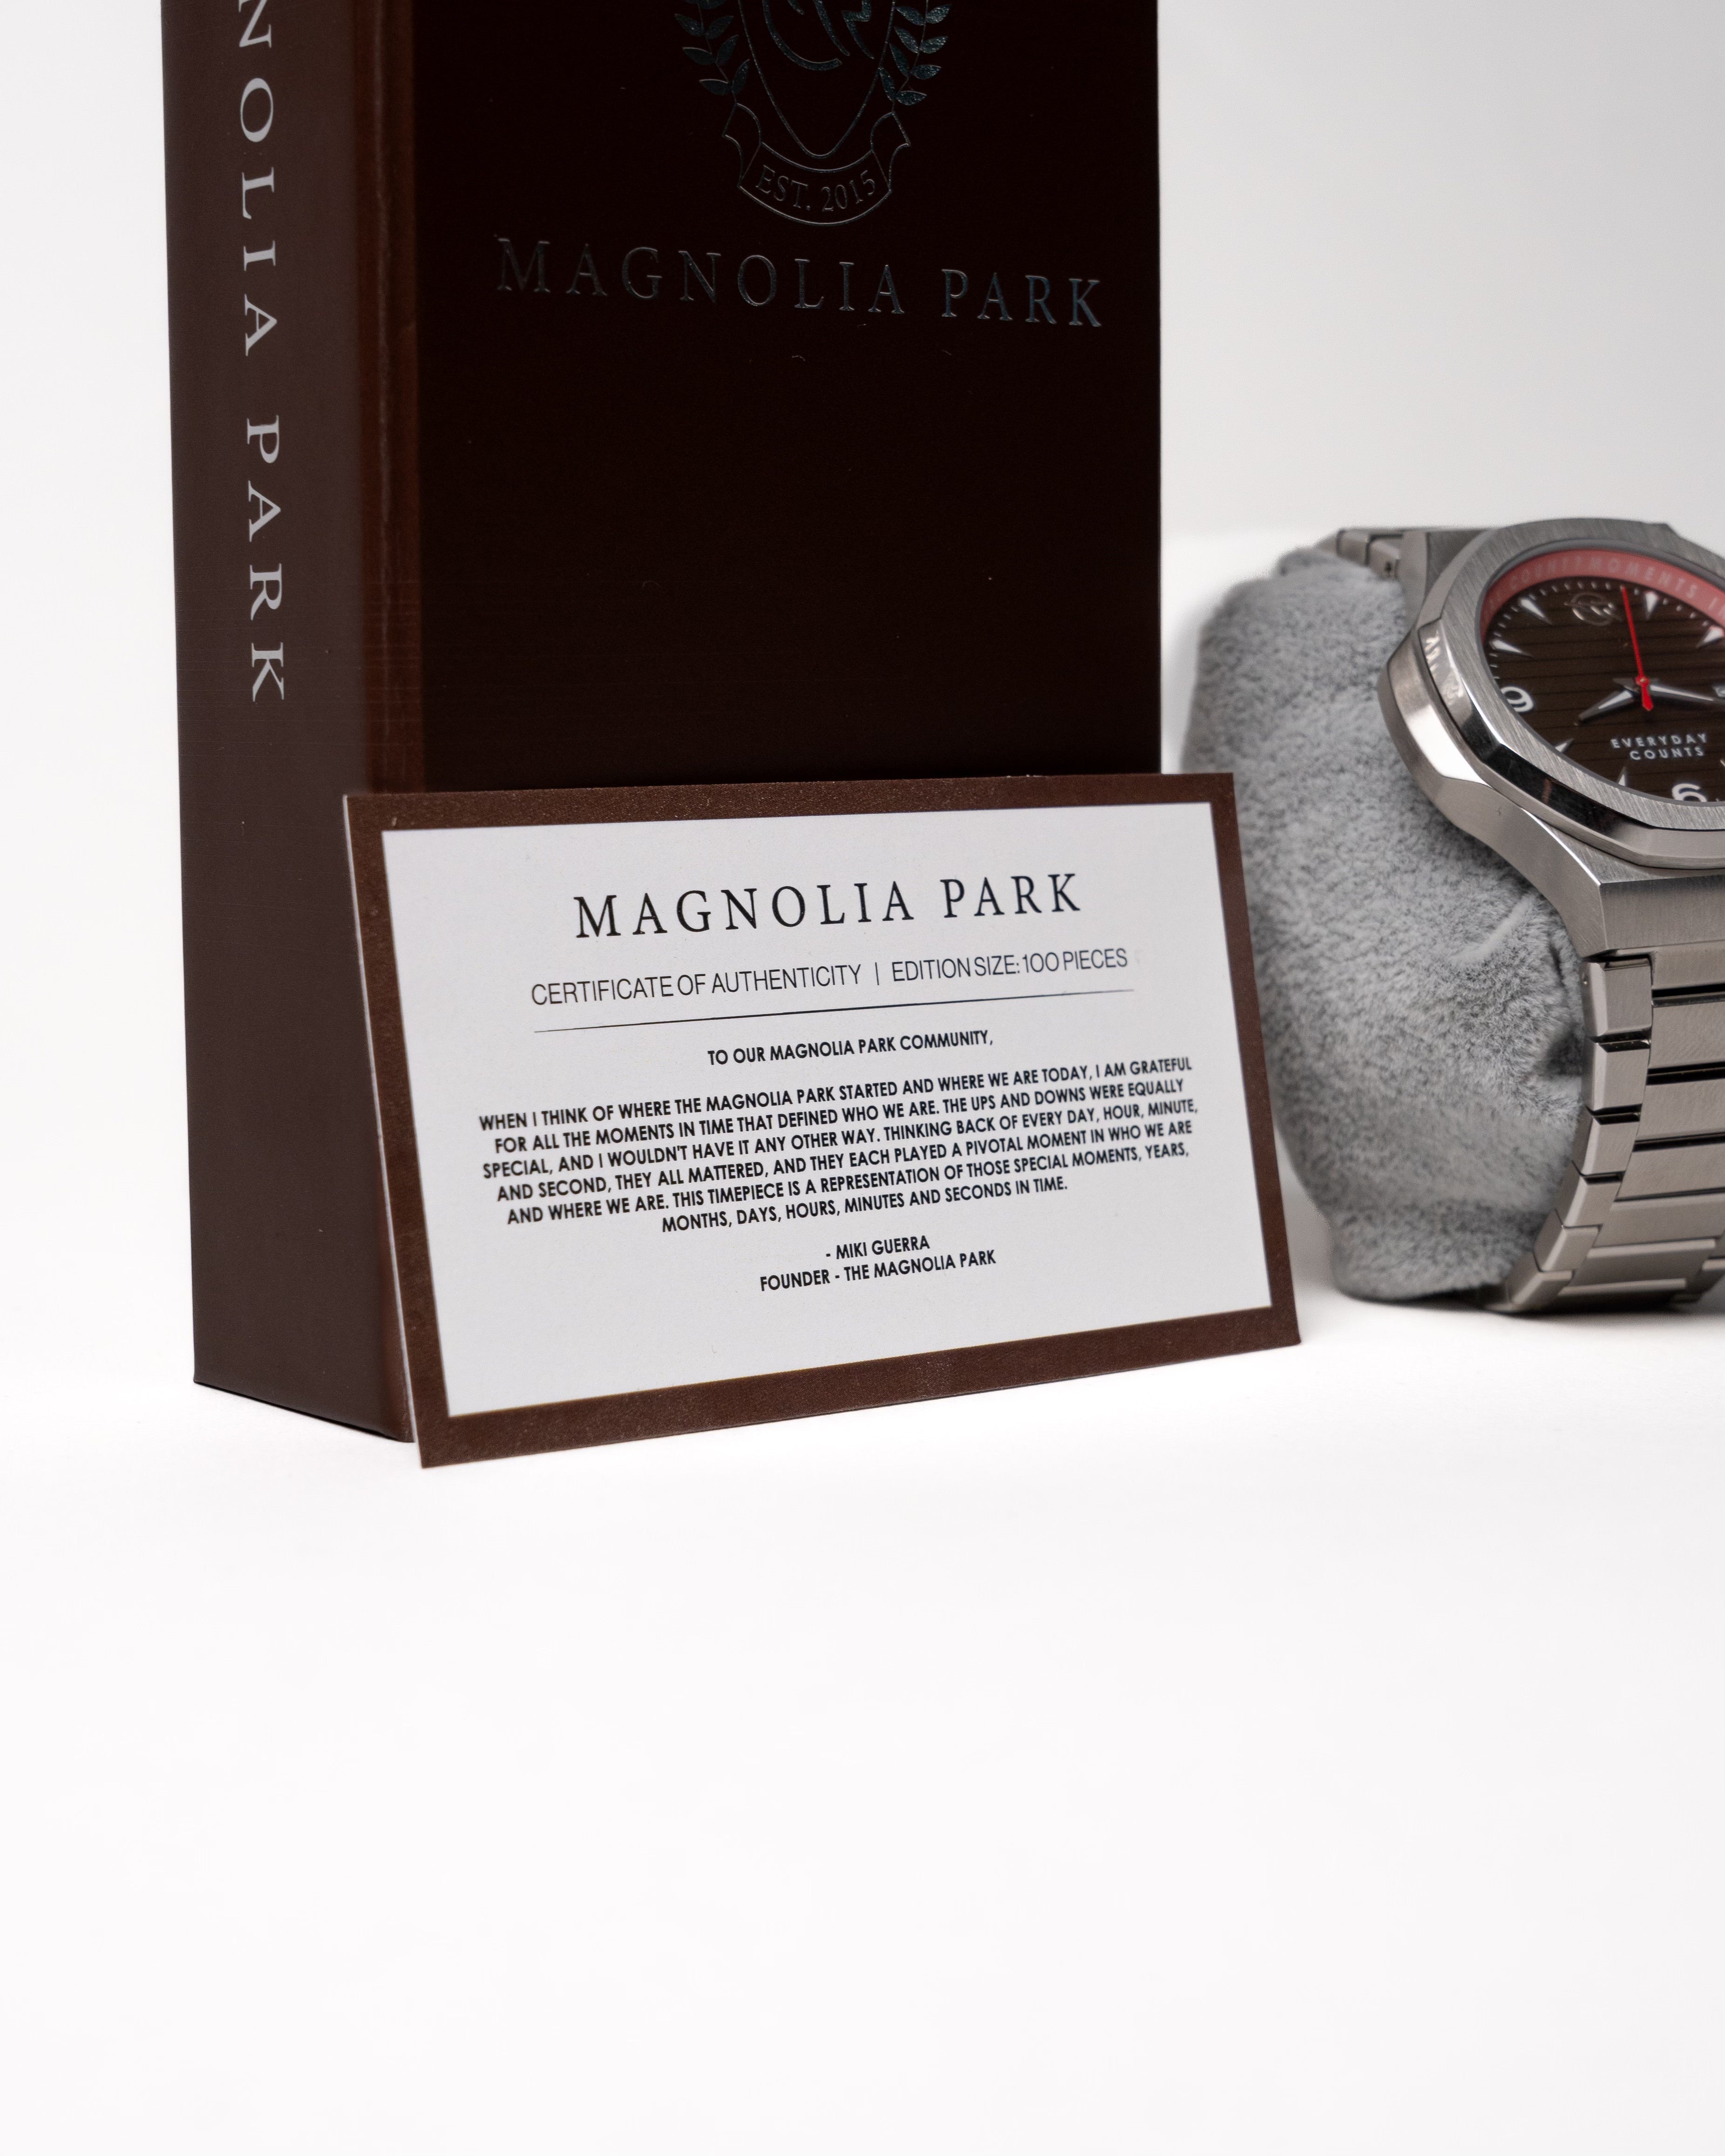 The Magnolia Park “Everyday Counts” Day Trip Watch